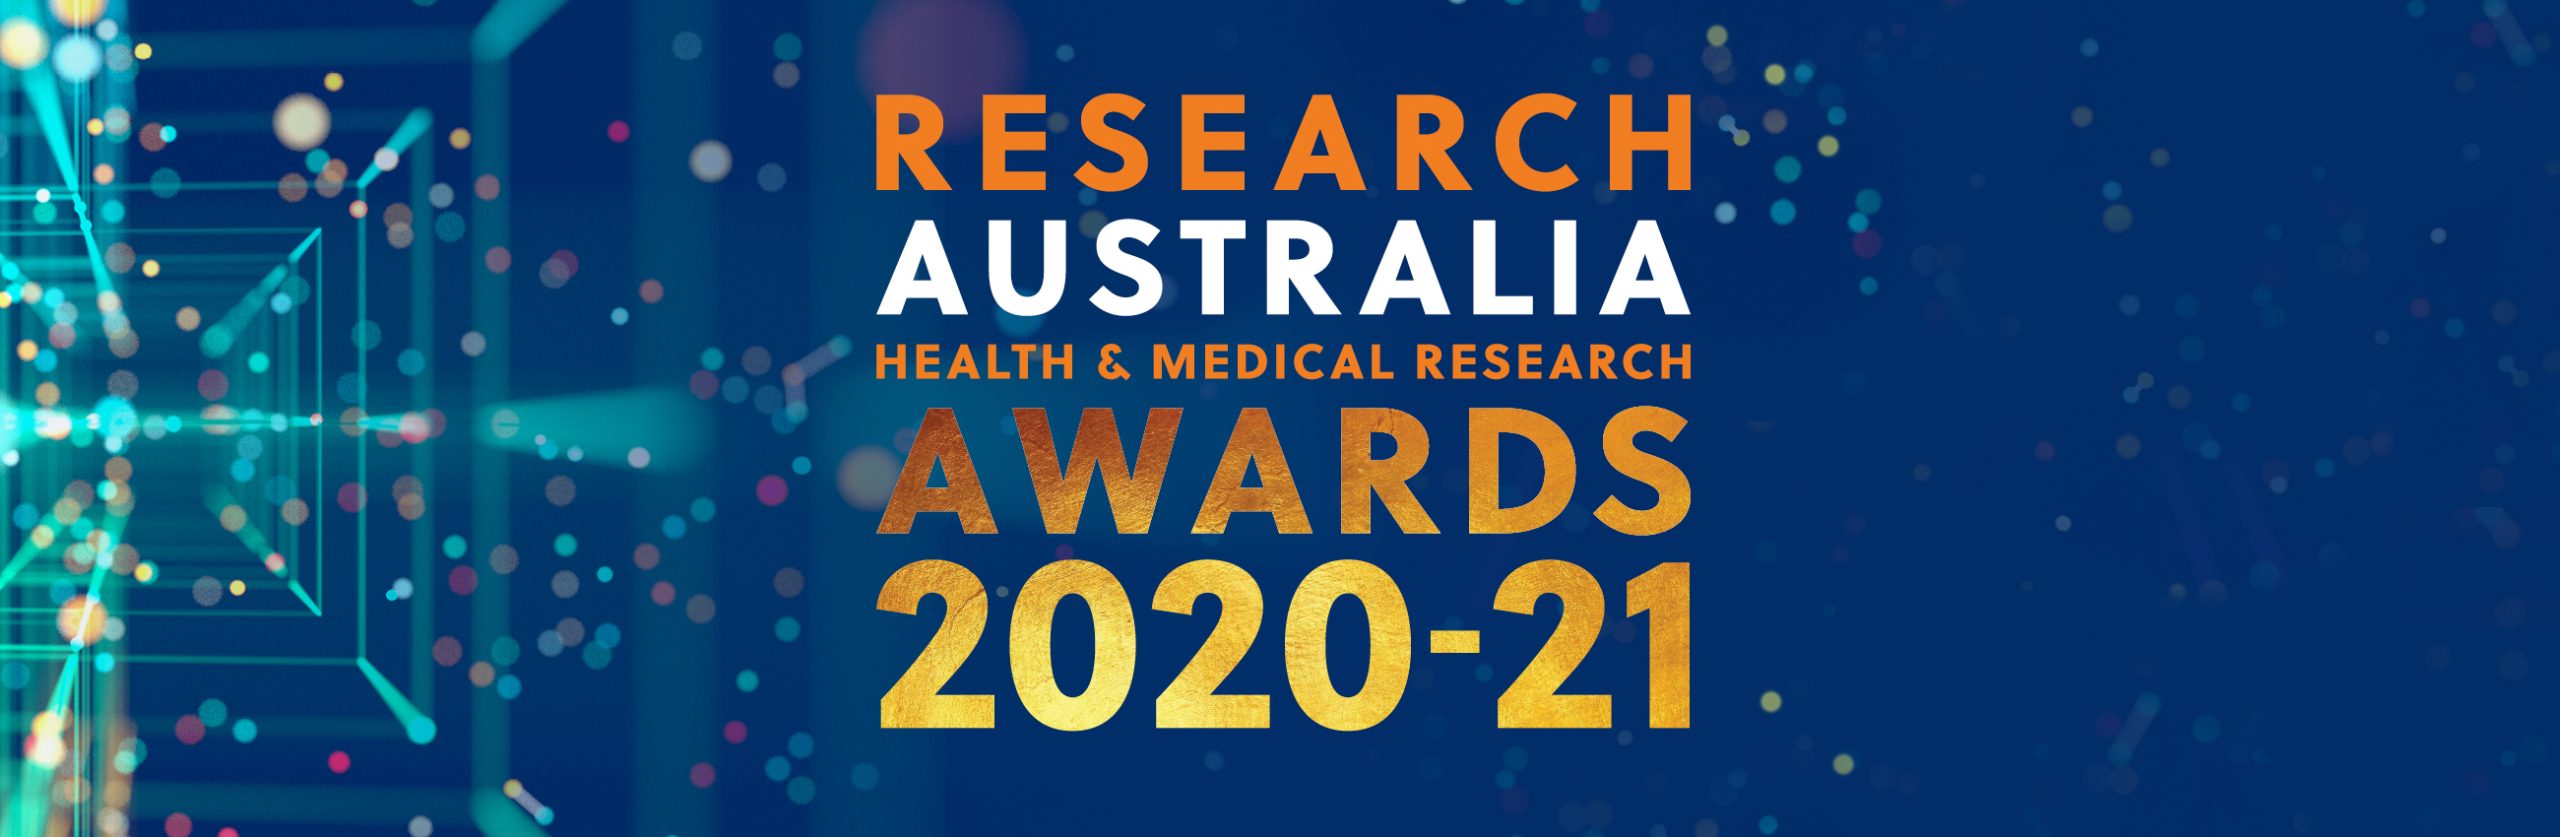 MEDIA RELEASE – Congratulations to the 2020-21 Health and Medical Research Award Winners